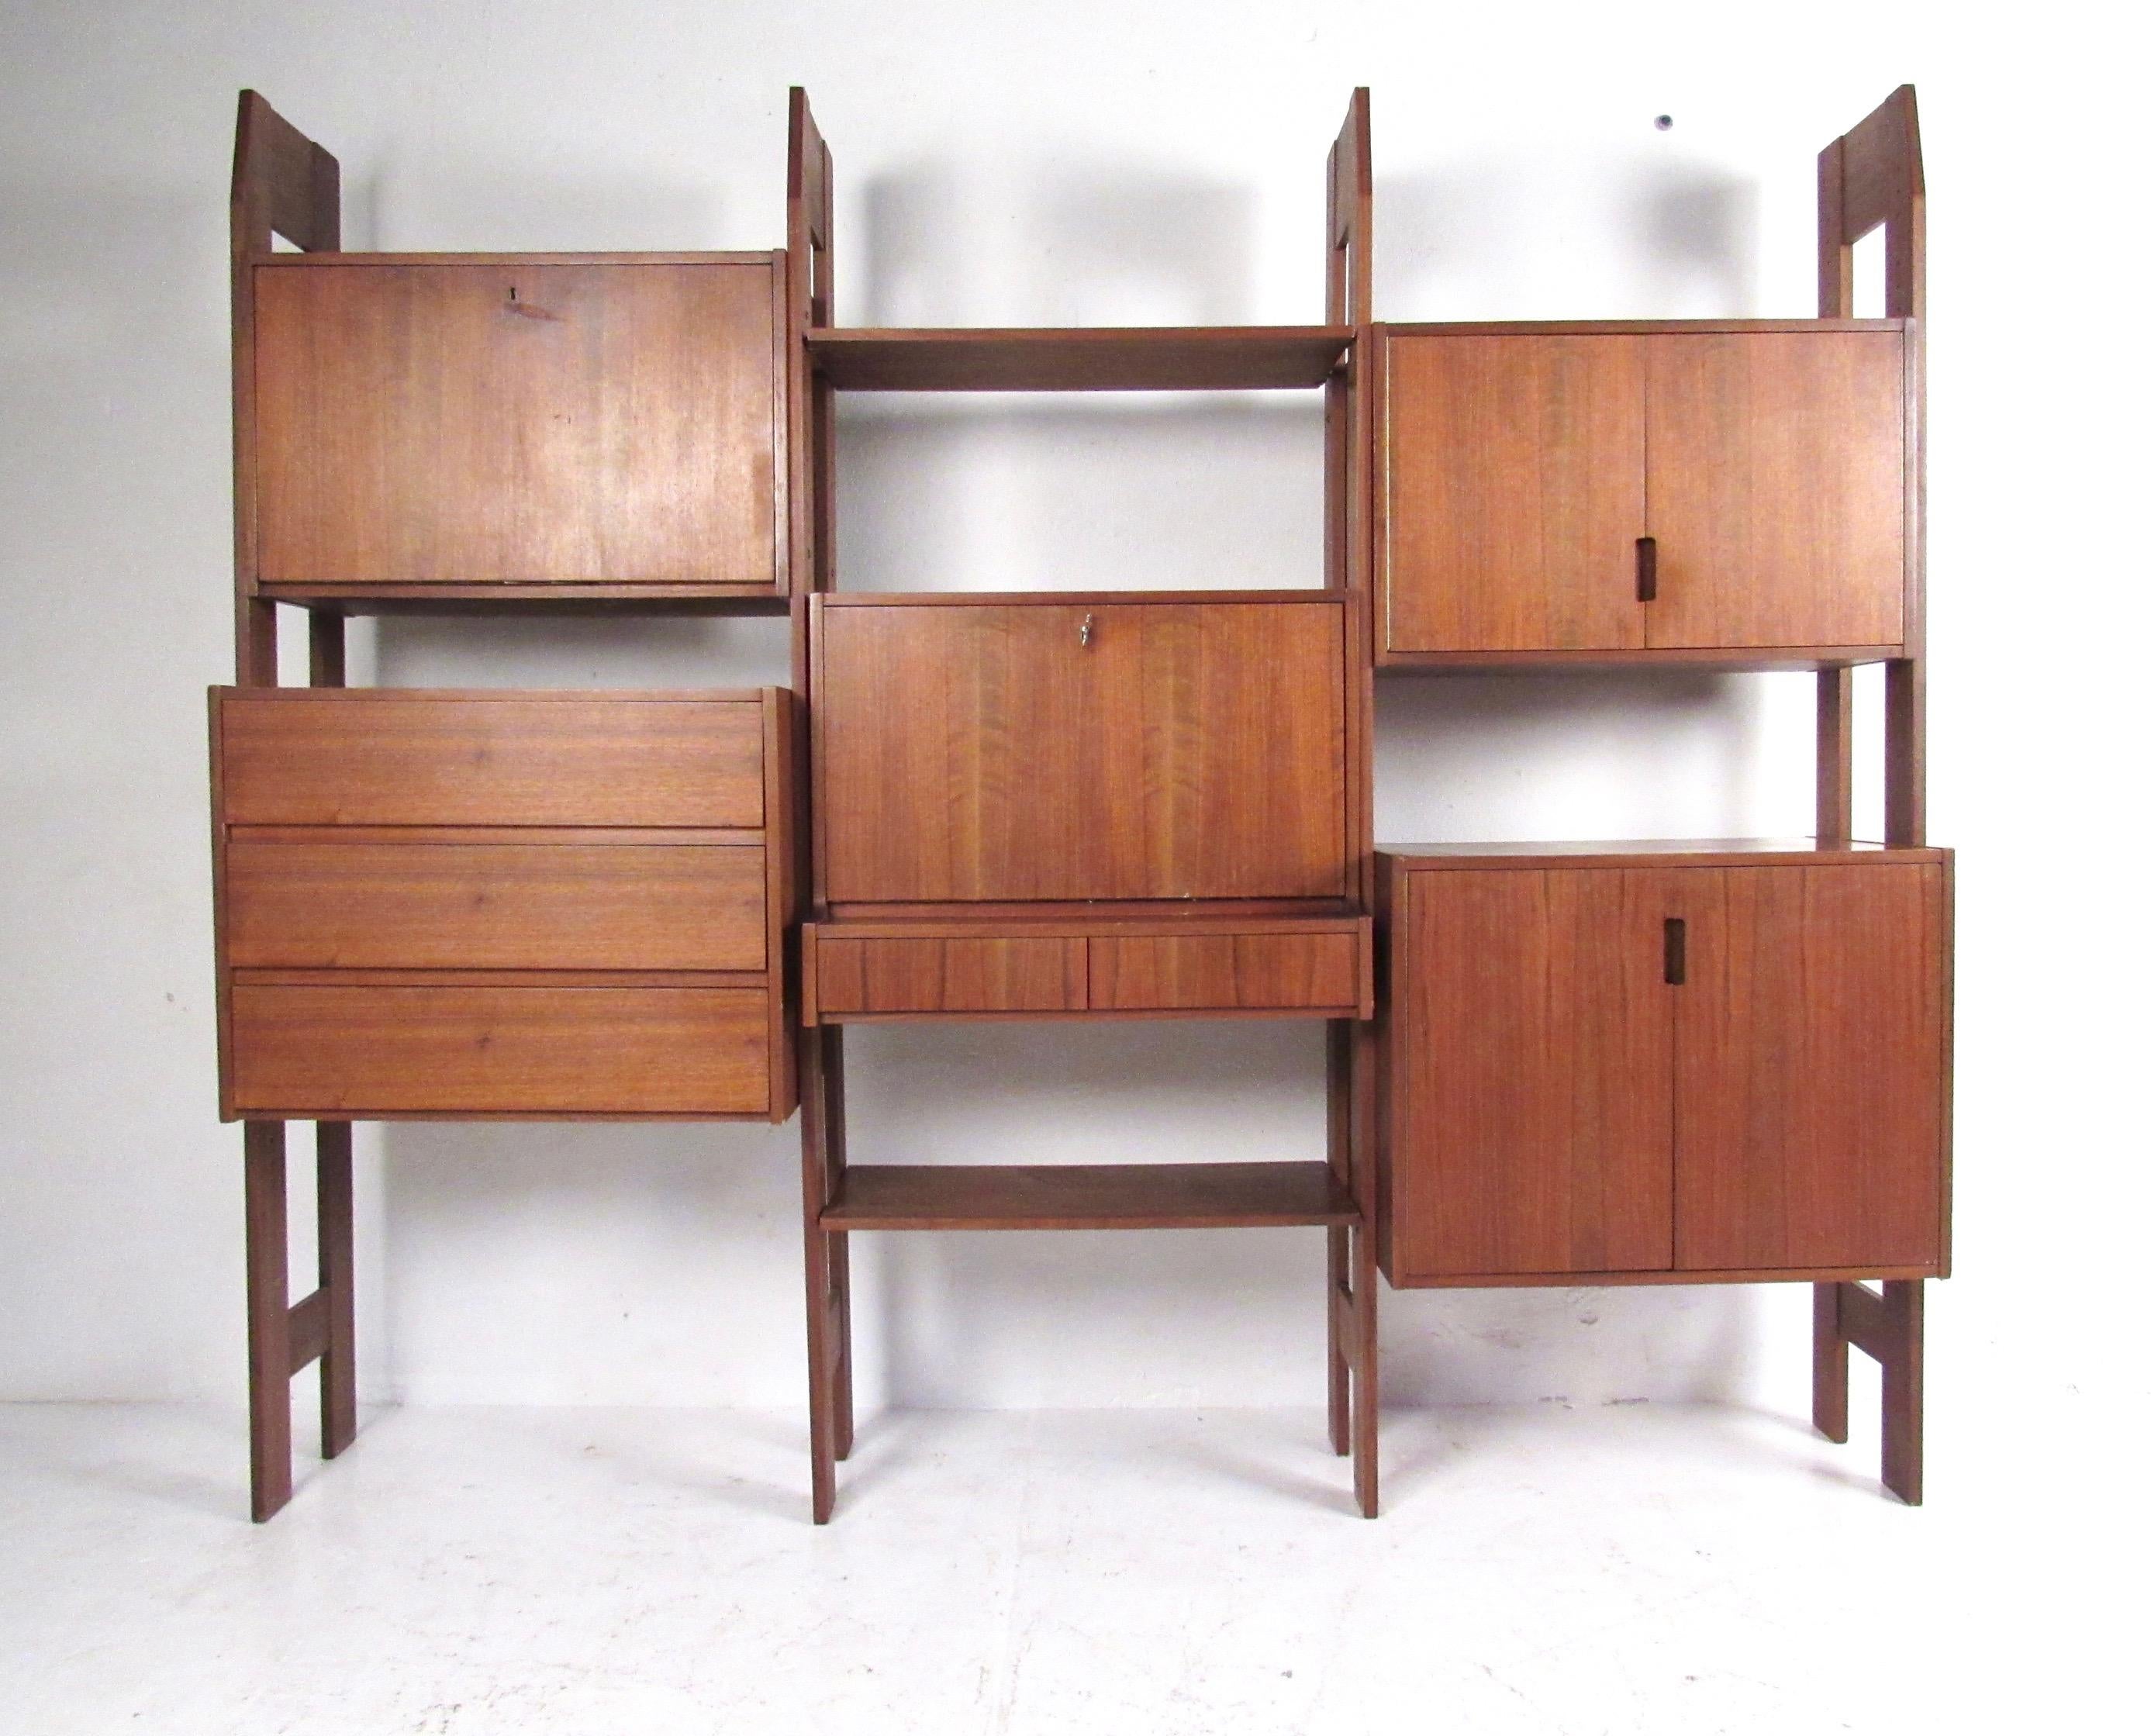 This large three bay wall unit features a versatile mixture of cabinet and shelf storage. Three-drawer dresser, drop front workspace, dry bar, and shelved cabinet storage can all be configured in the arrangement best suited to your home or business.